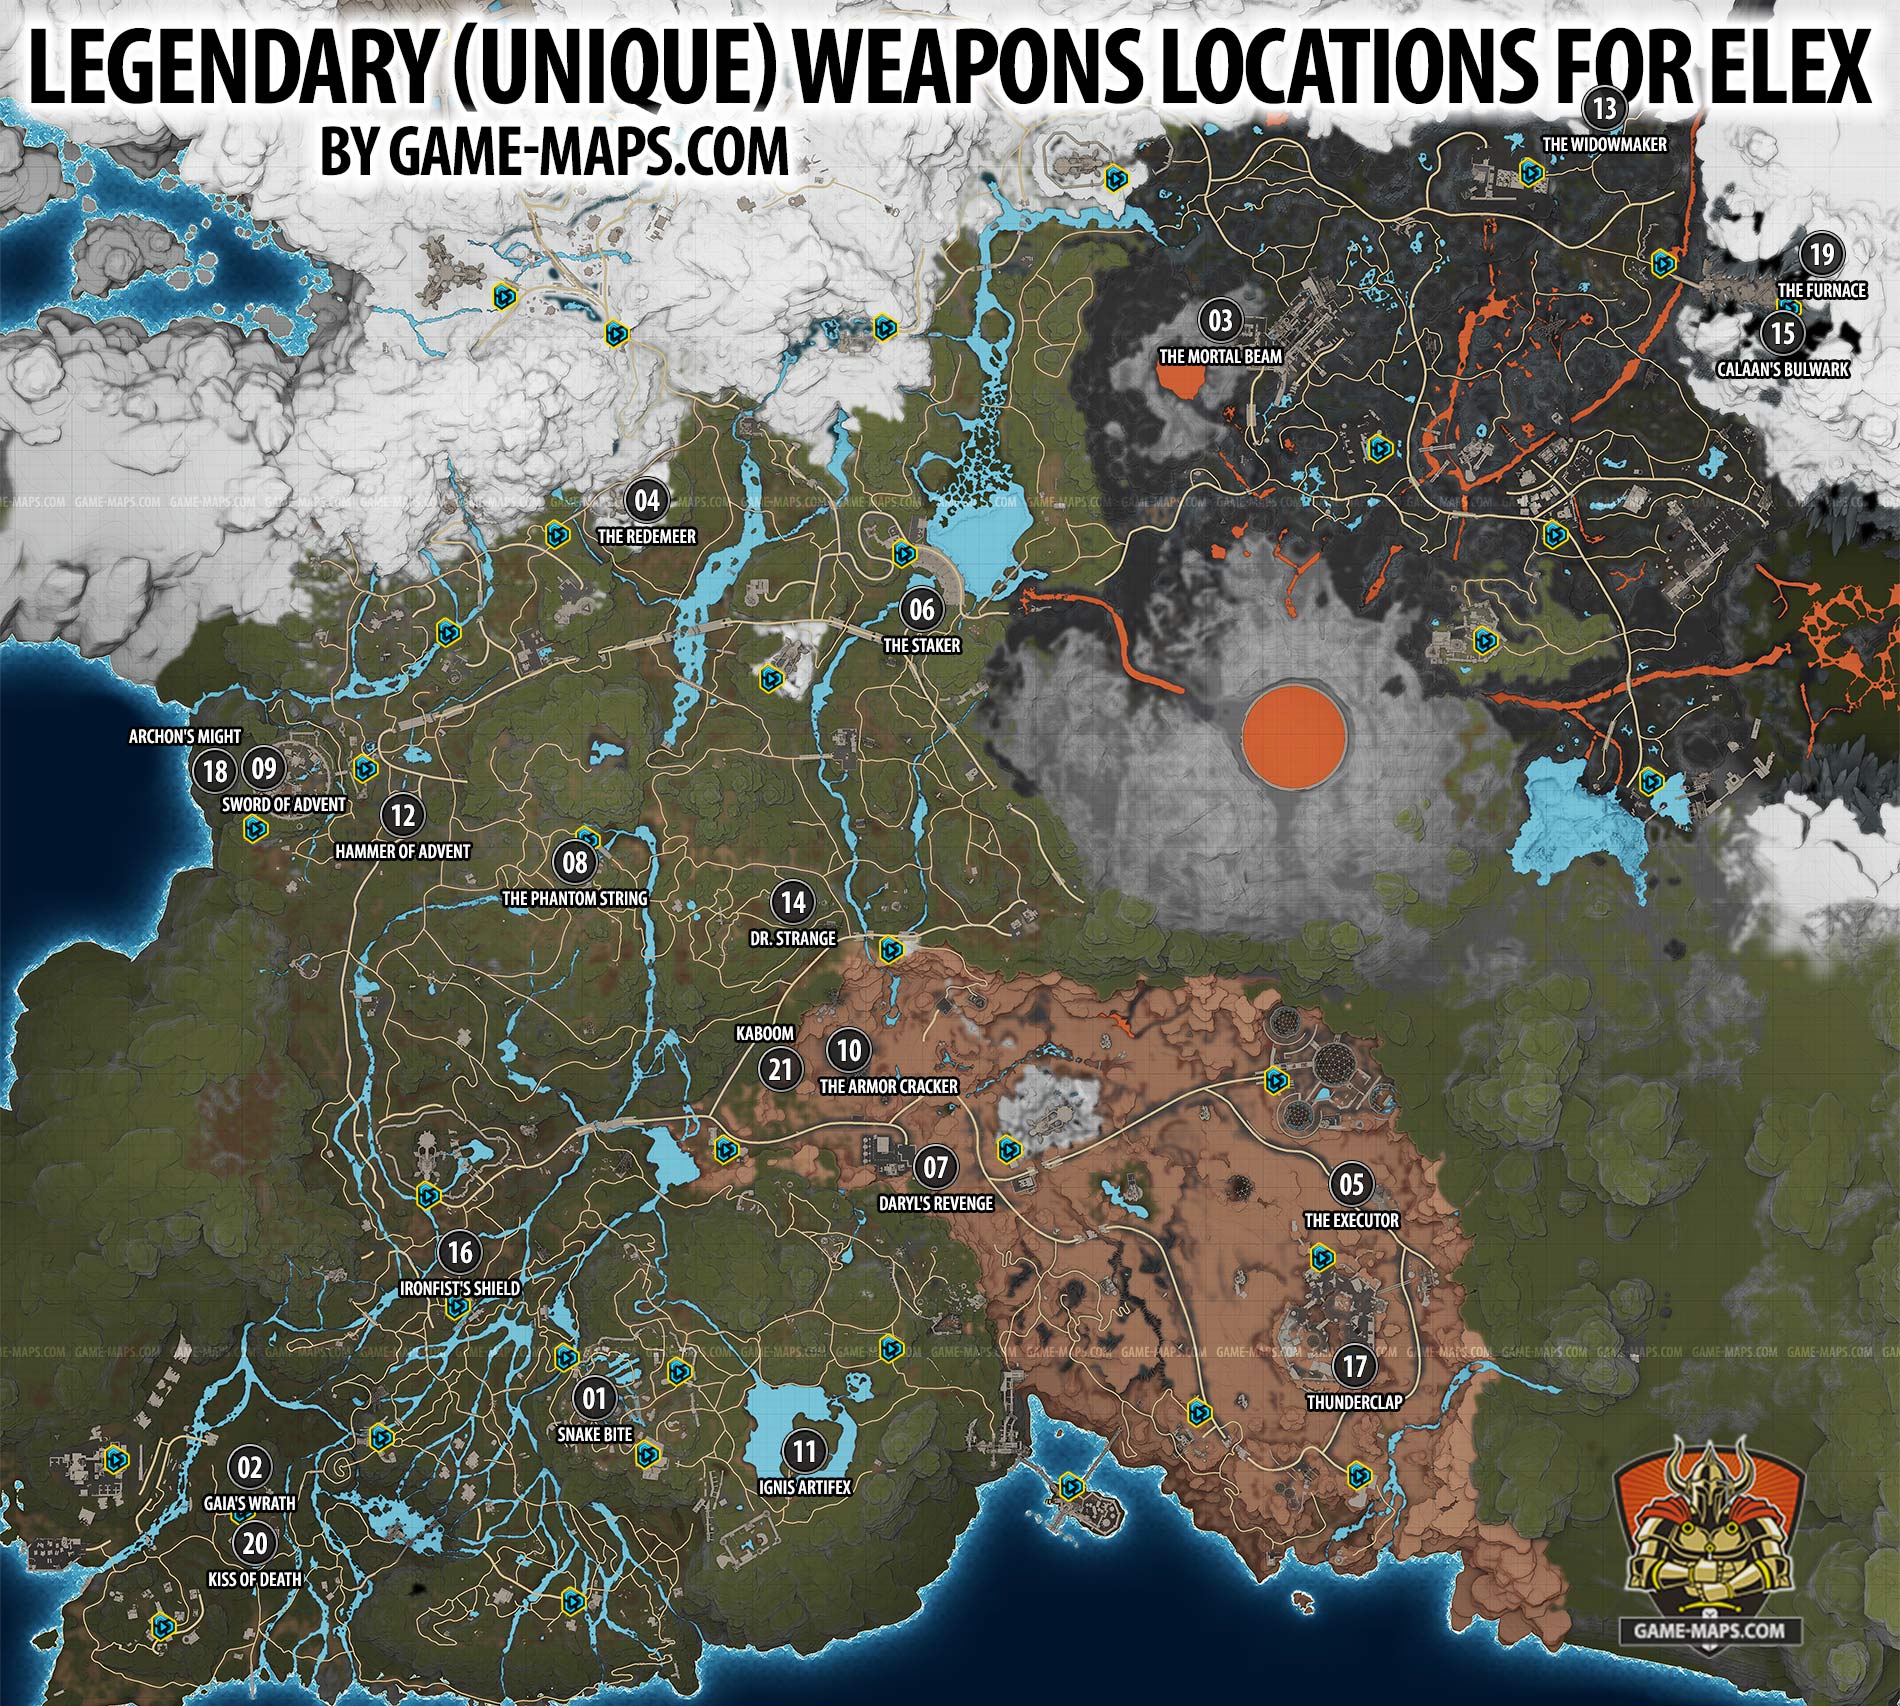 Legendary Weapons Locations for ELEX